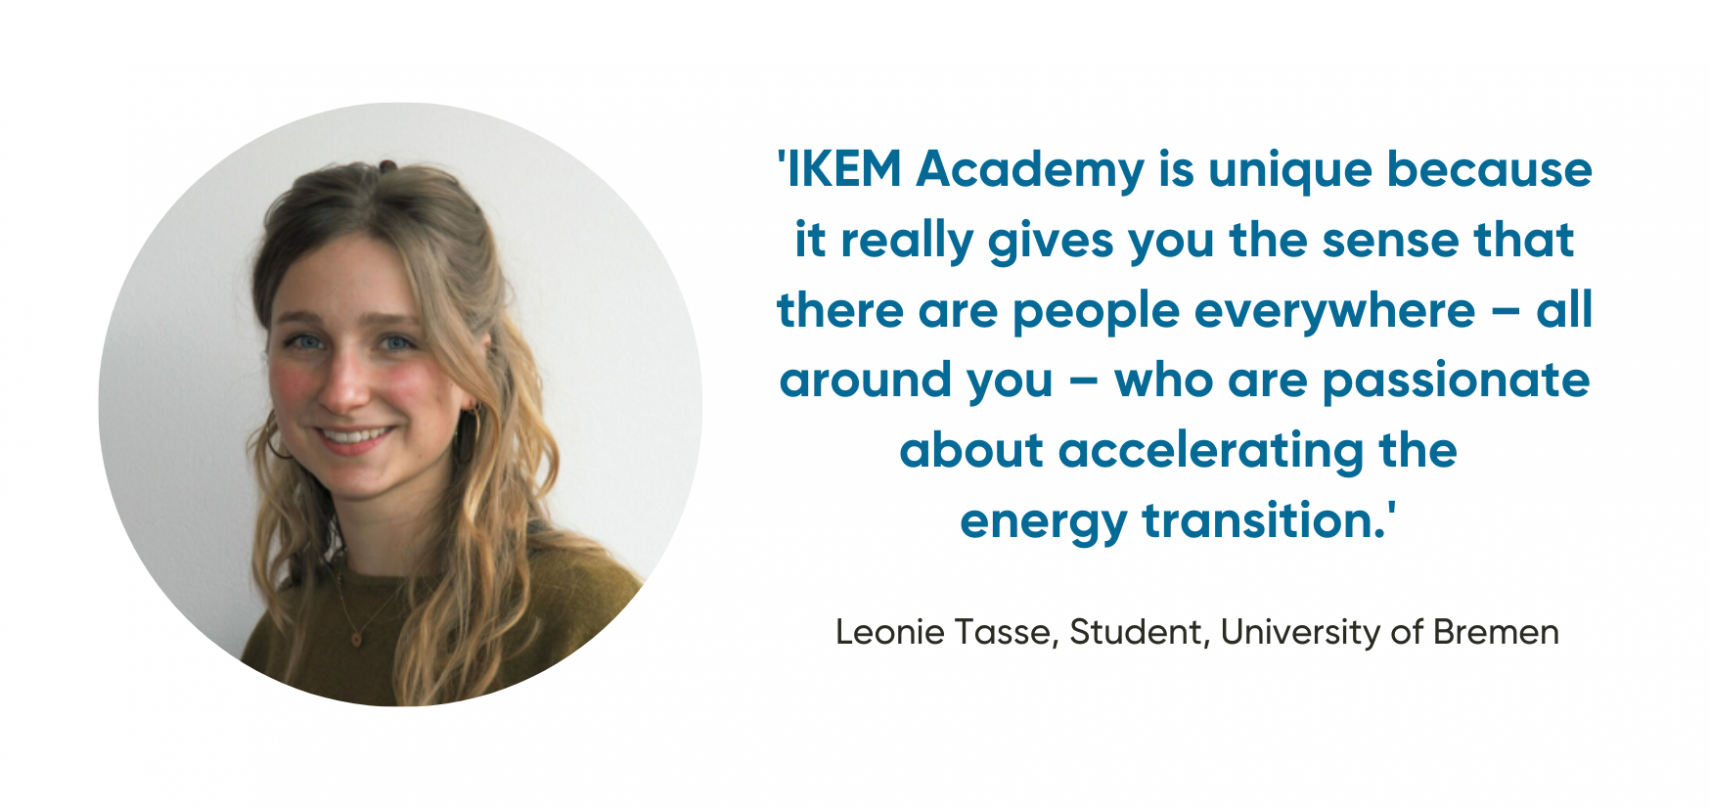 'IKEM Academy is unique because it really gives you the sense that there are people everywhere – all around you – who are passionate about accelerating  the energy transition.'  Leonie Tasse, Student, University of Bremen